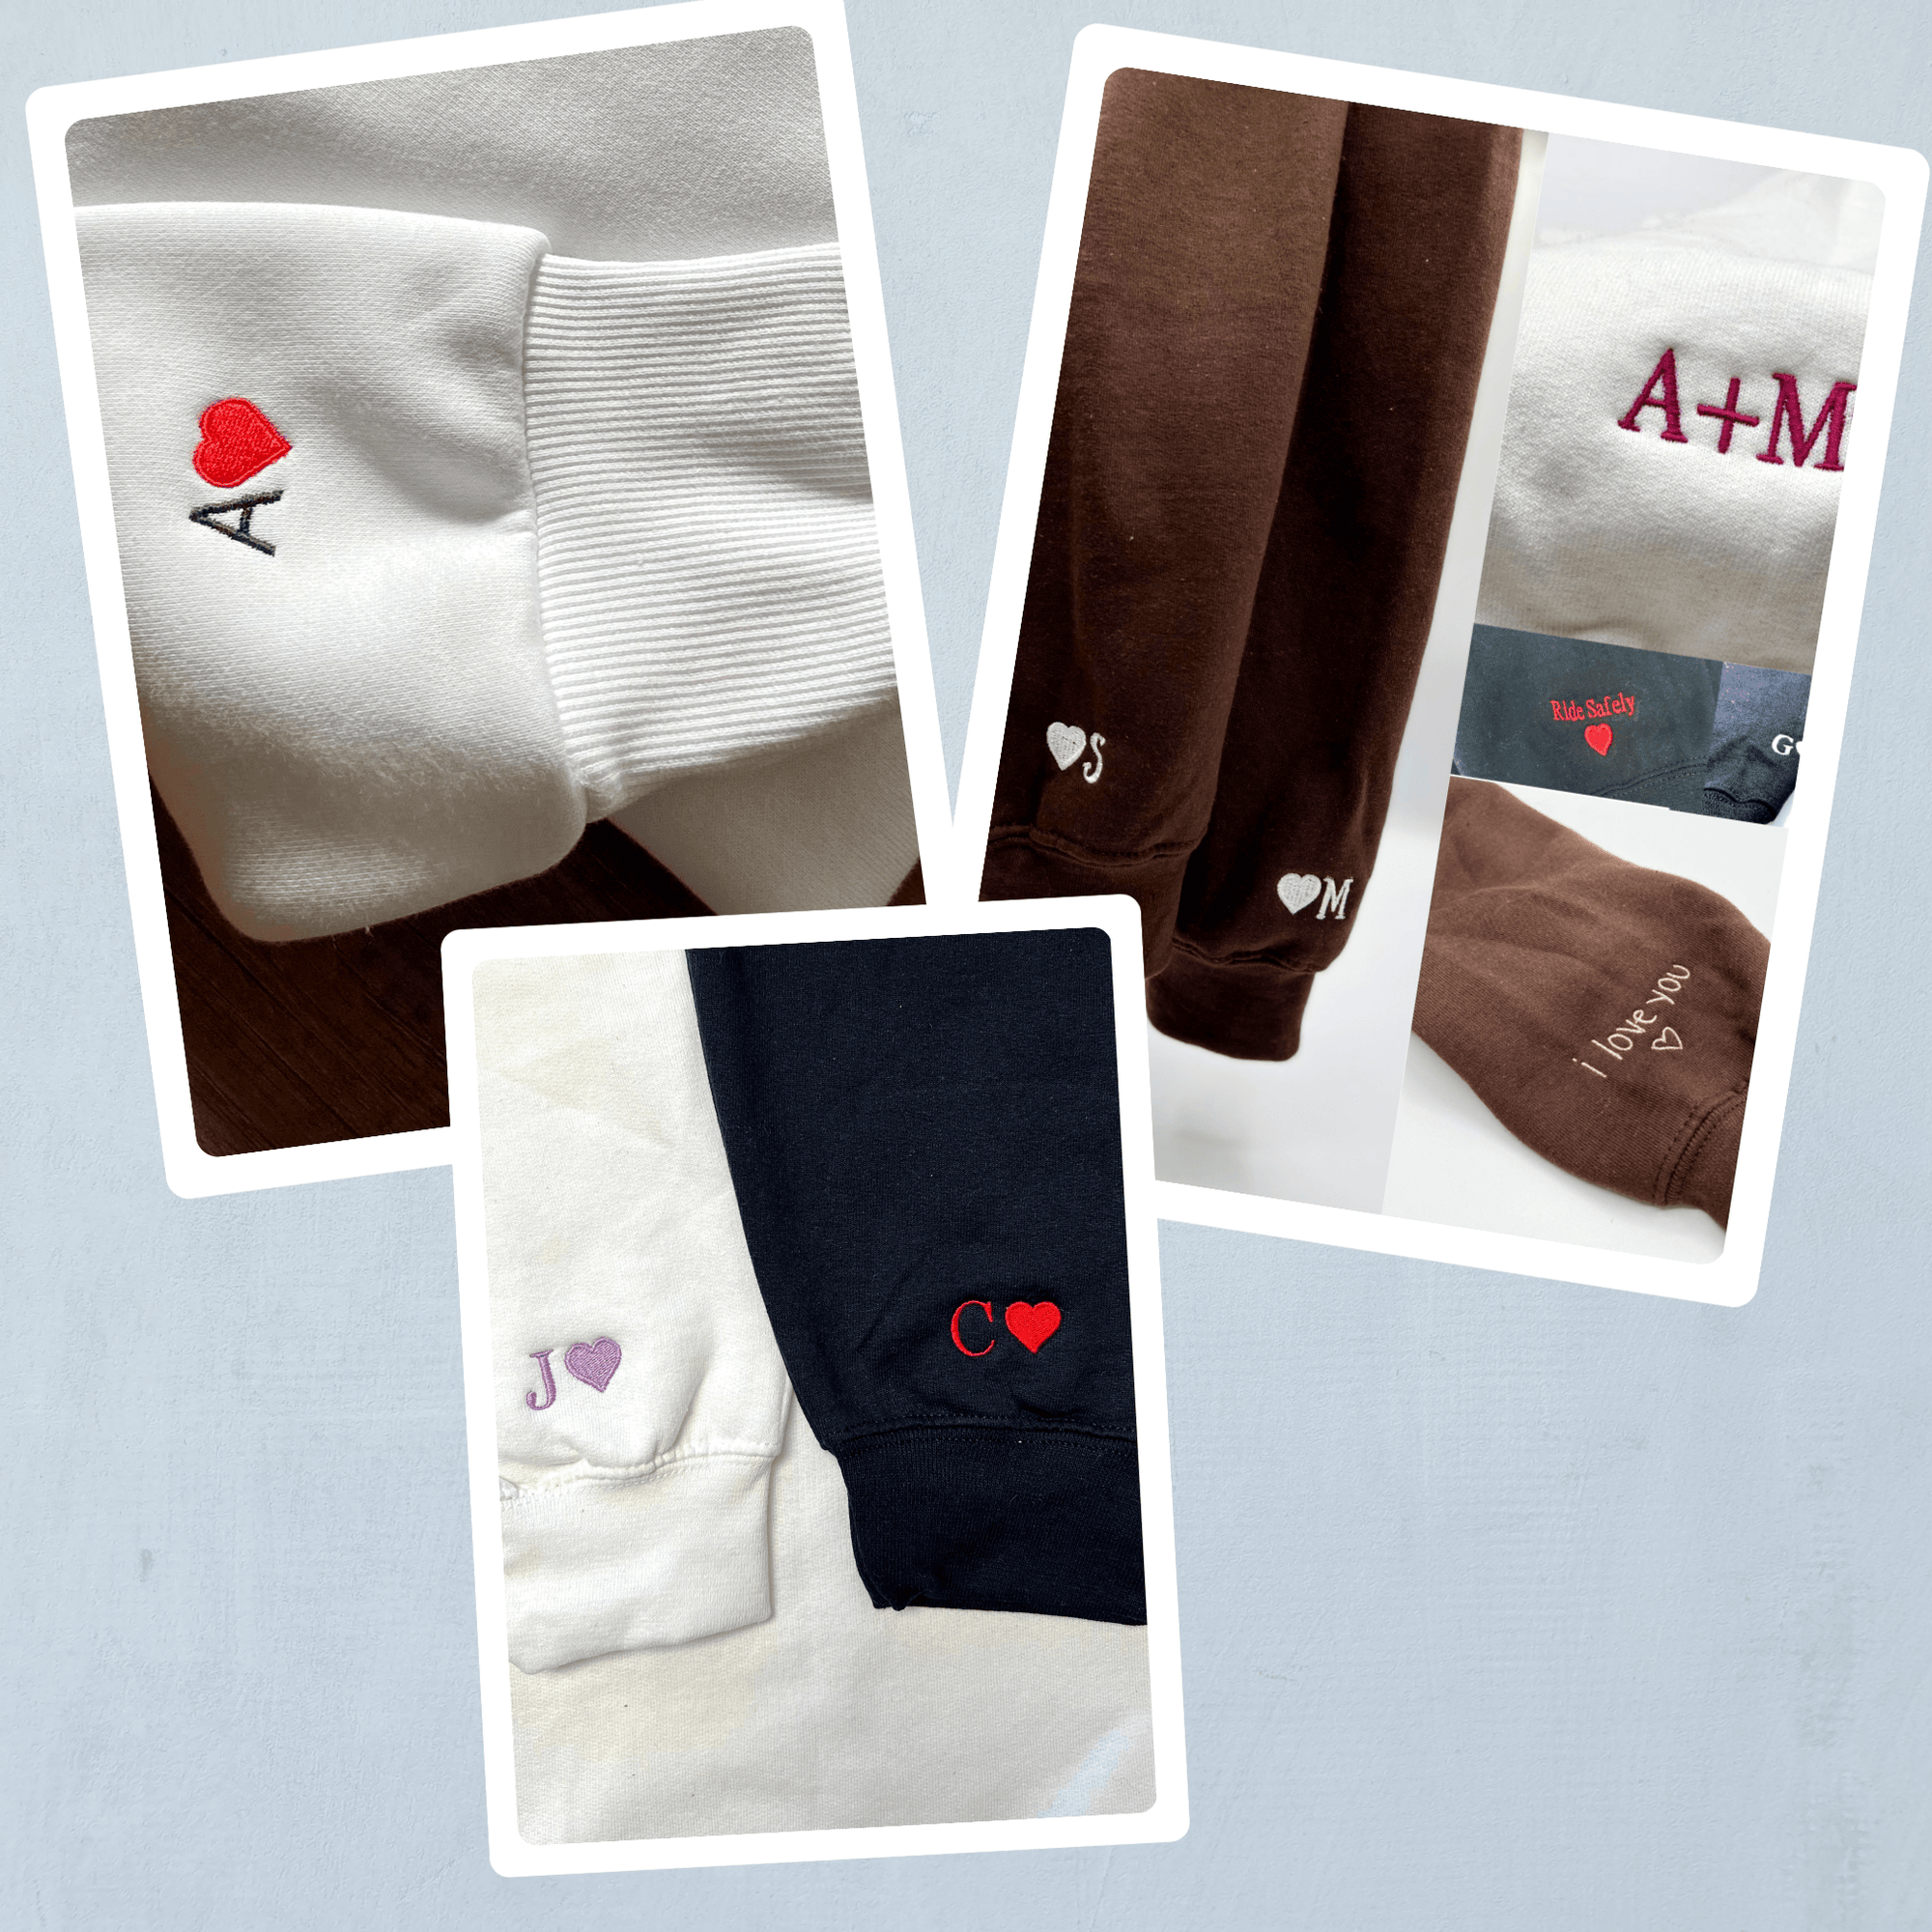 Custom Embroidered Roman Numeral Hoodies For Couples, Roman Numeral Date Hoodie, Flame Couples Embroidered Hoodie